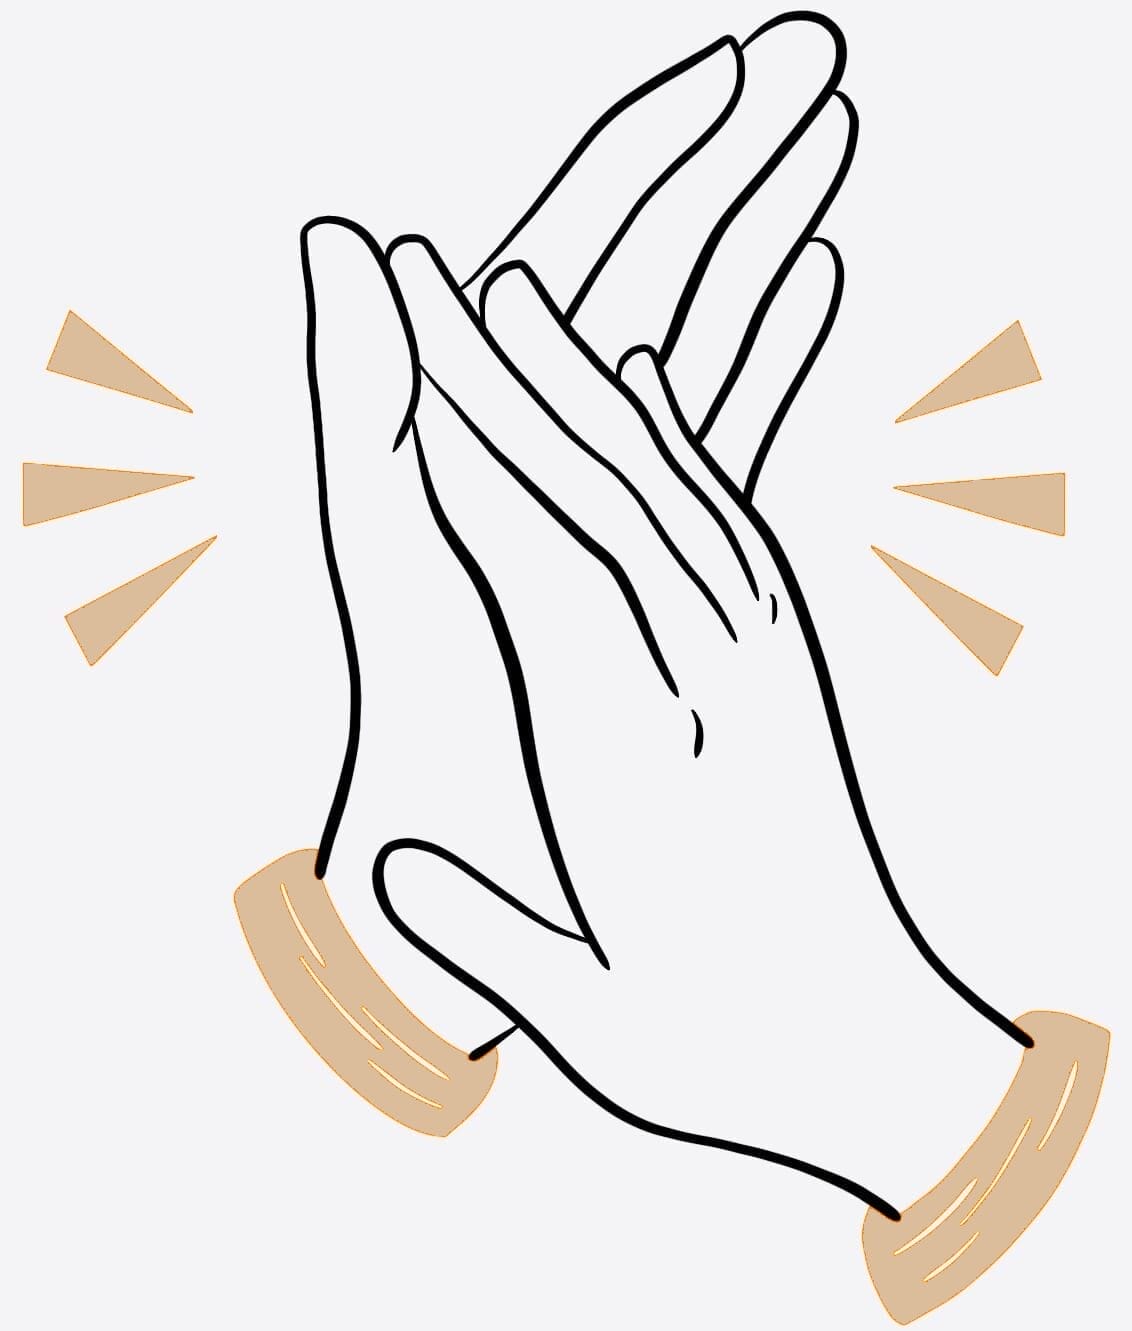 Image of Hands Clapping